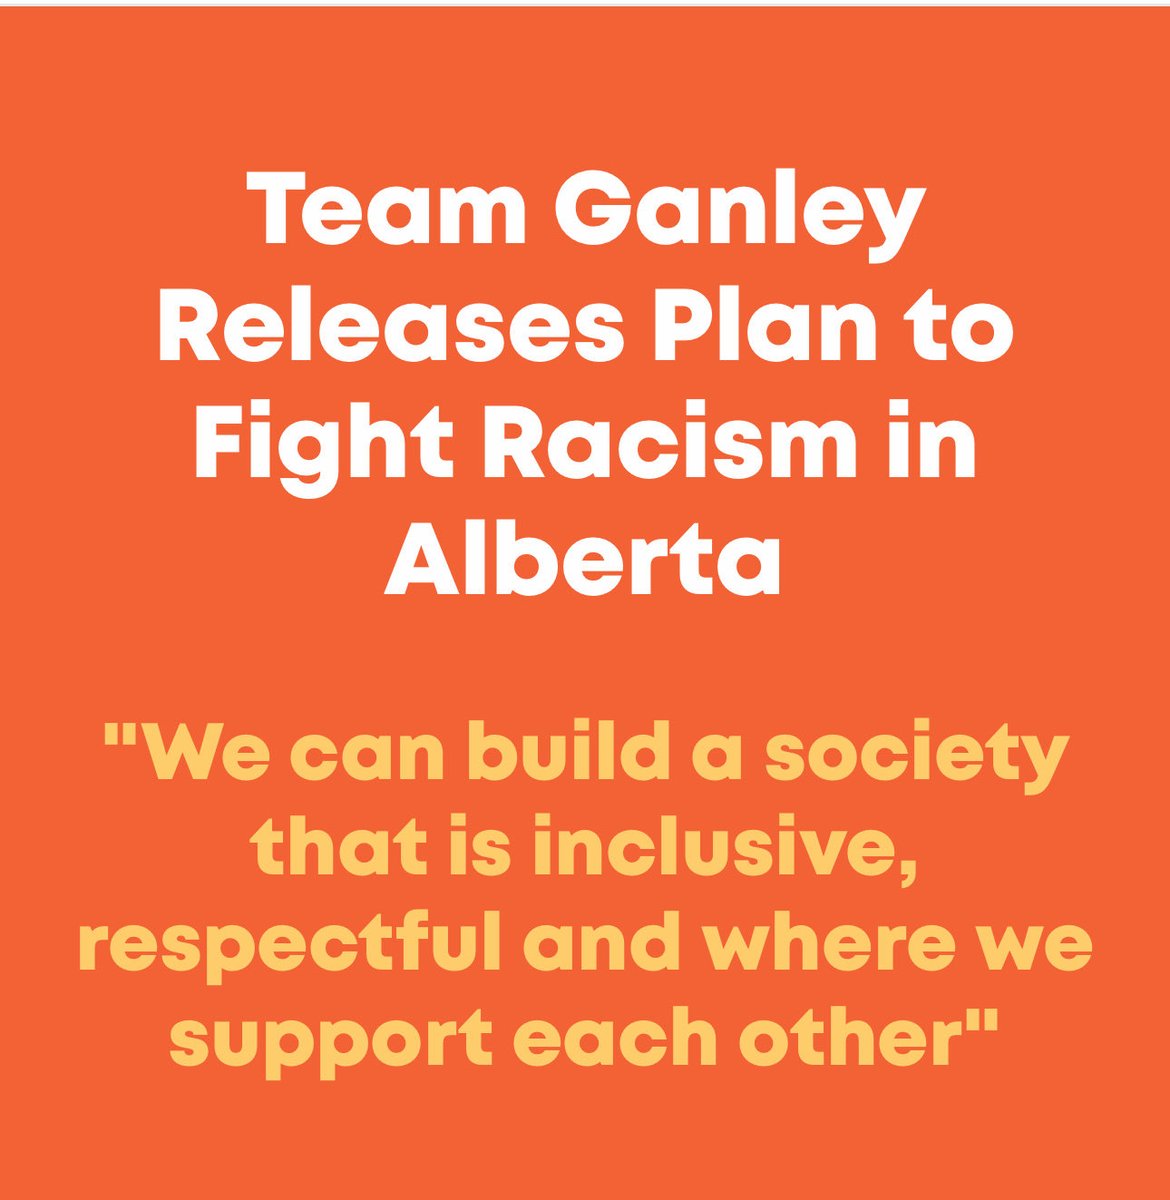 Thanks for helping to build a more loving and inclusive society ⁦@KathleenGanley⁩! teamganley.ca/news-events/ga… #abpoli #TeamGanley